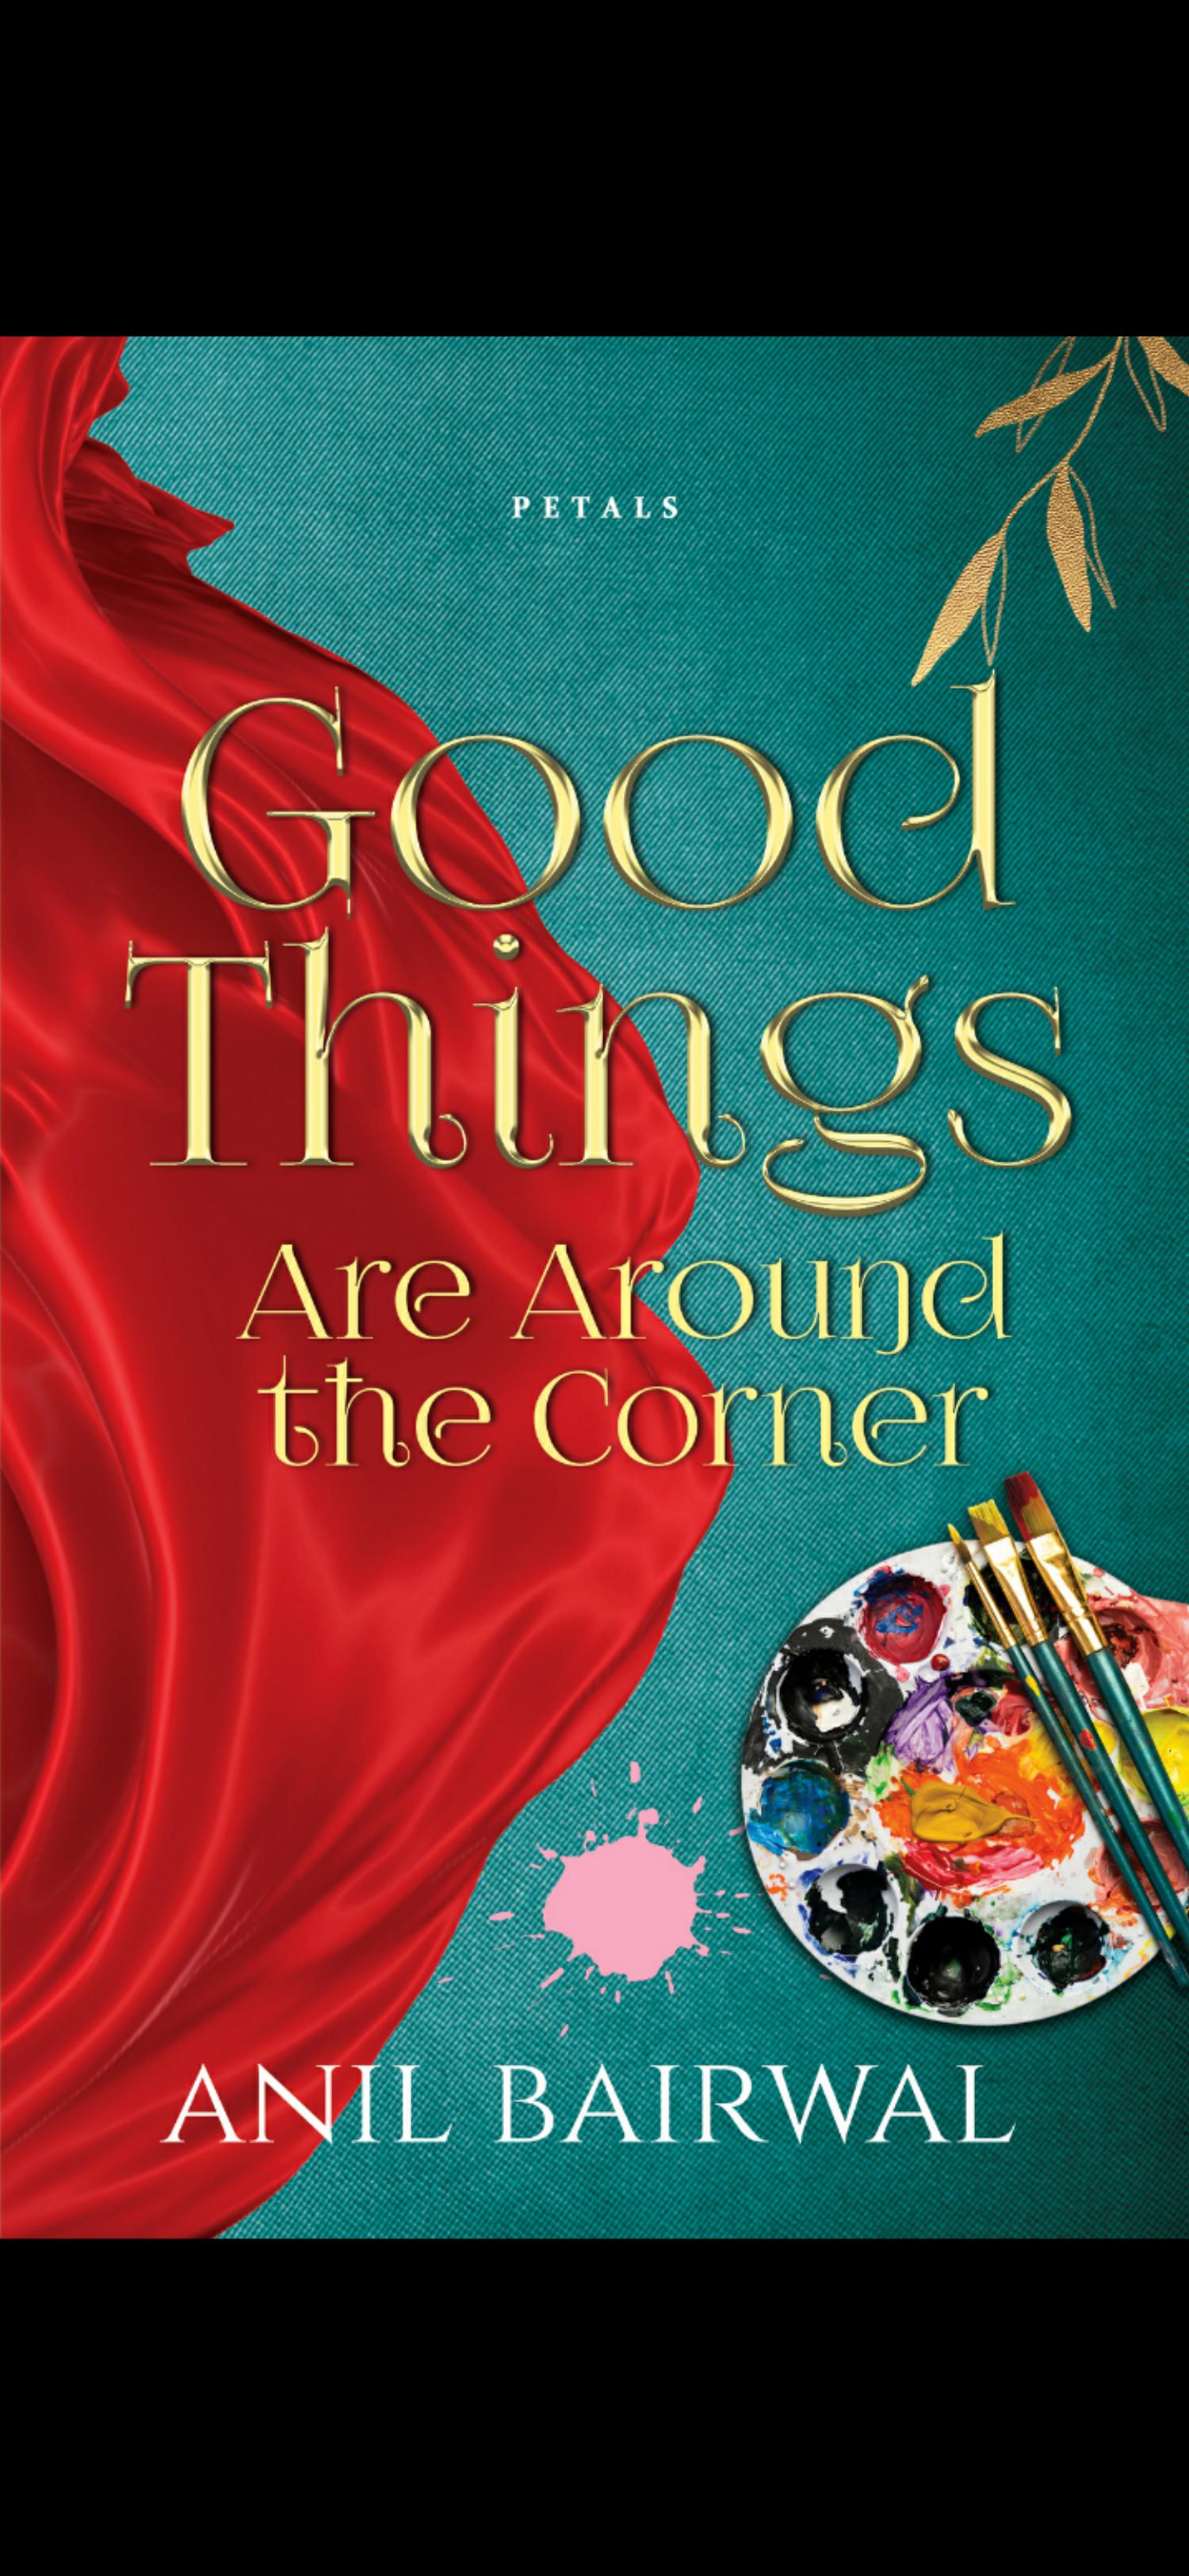 Good Things are Around the Corner by Anil Bairwal